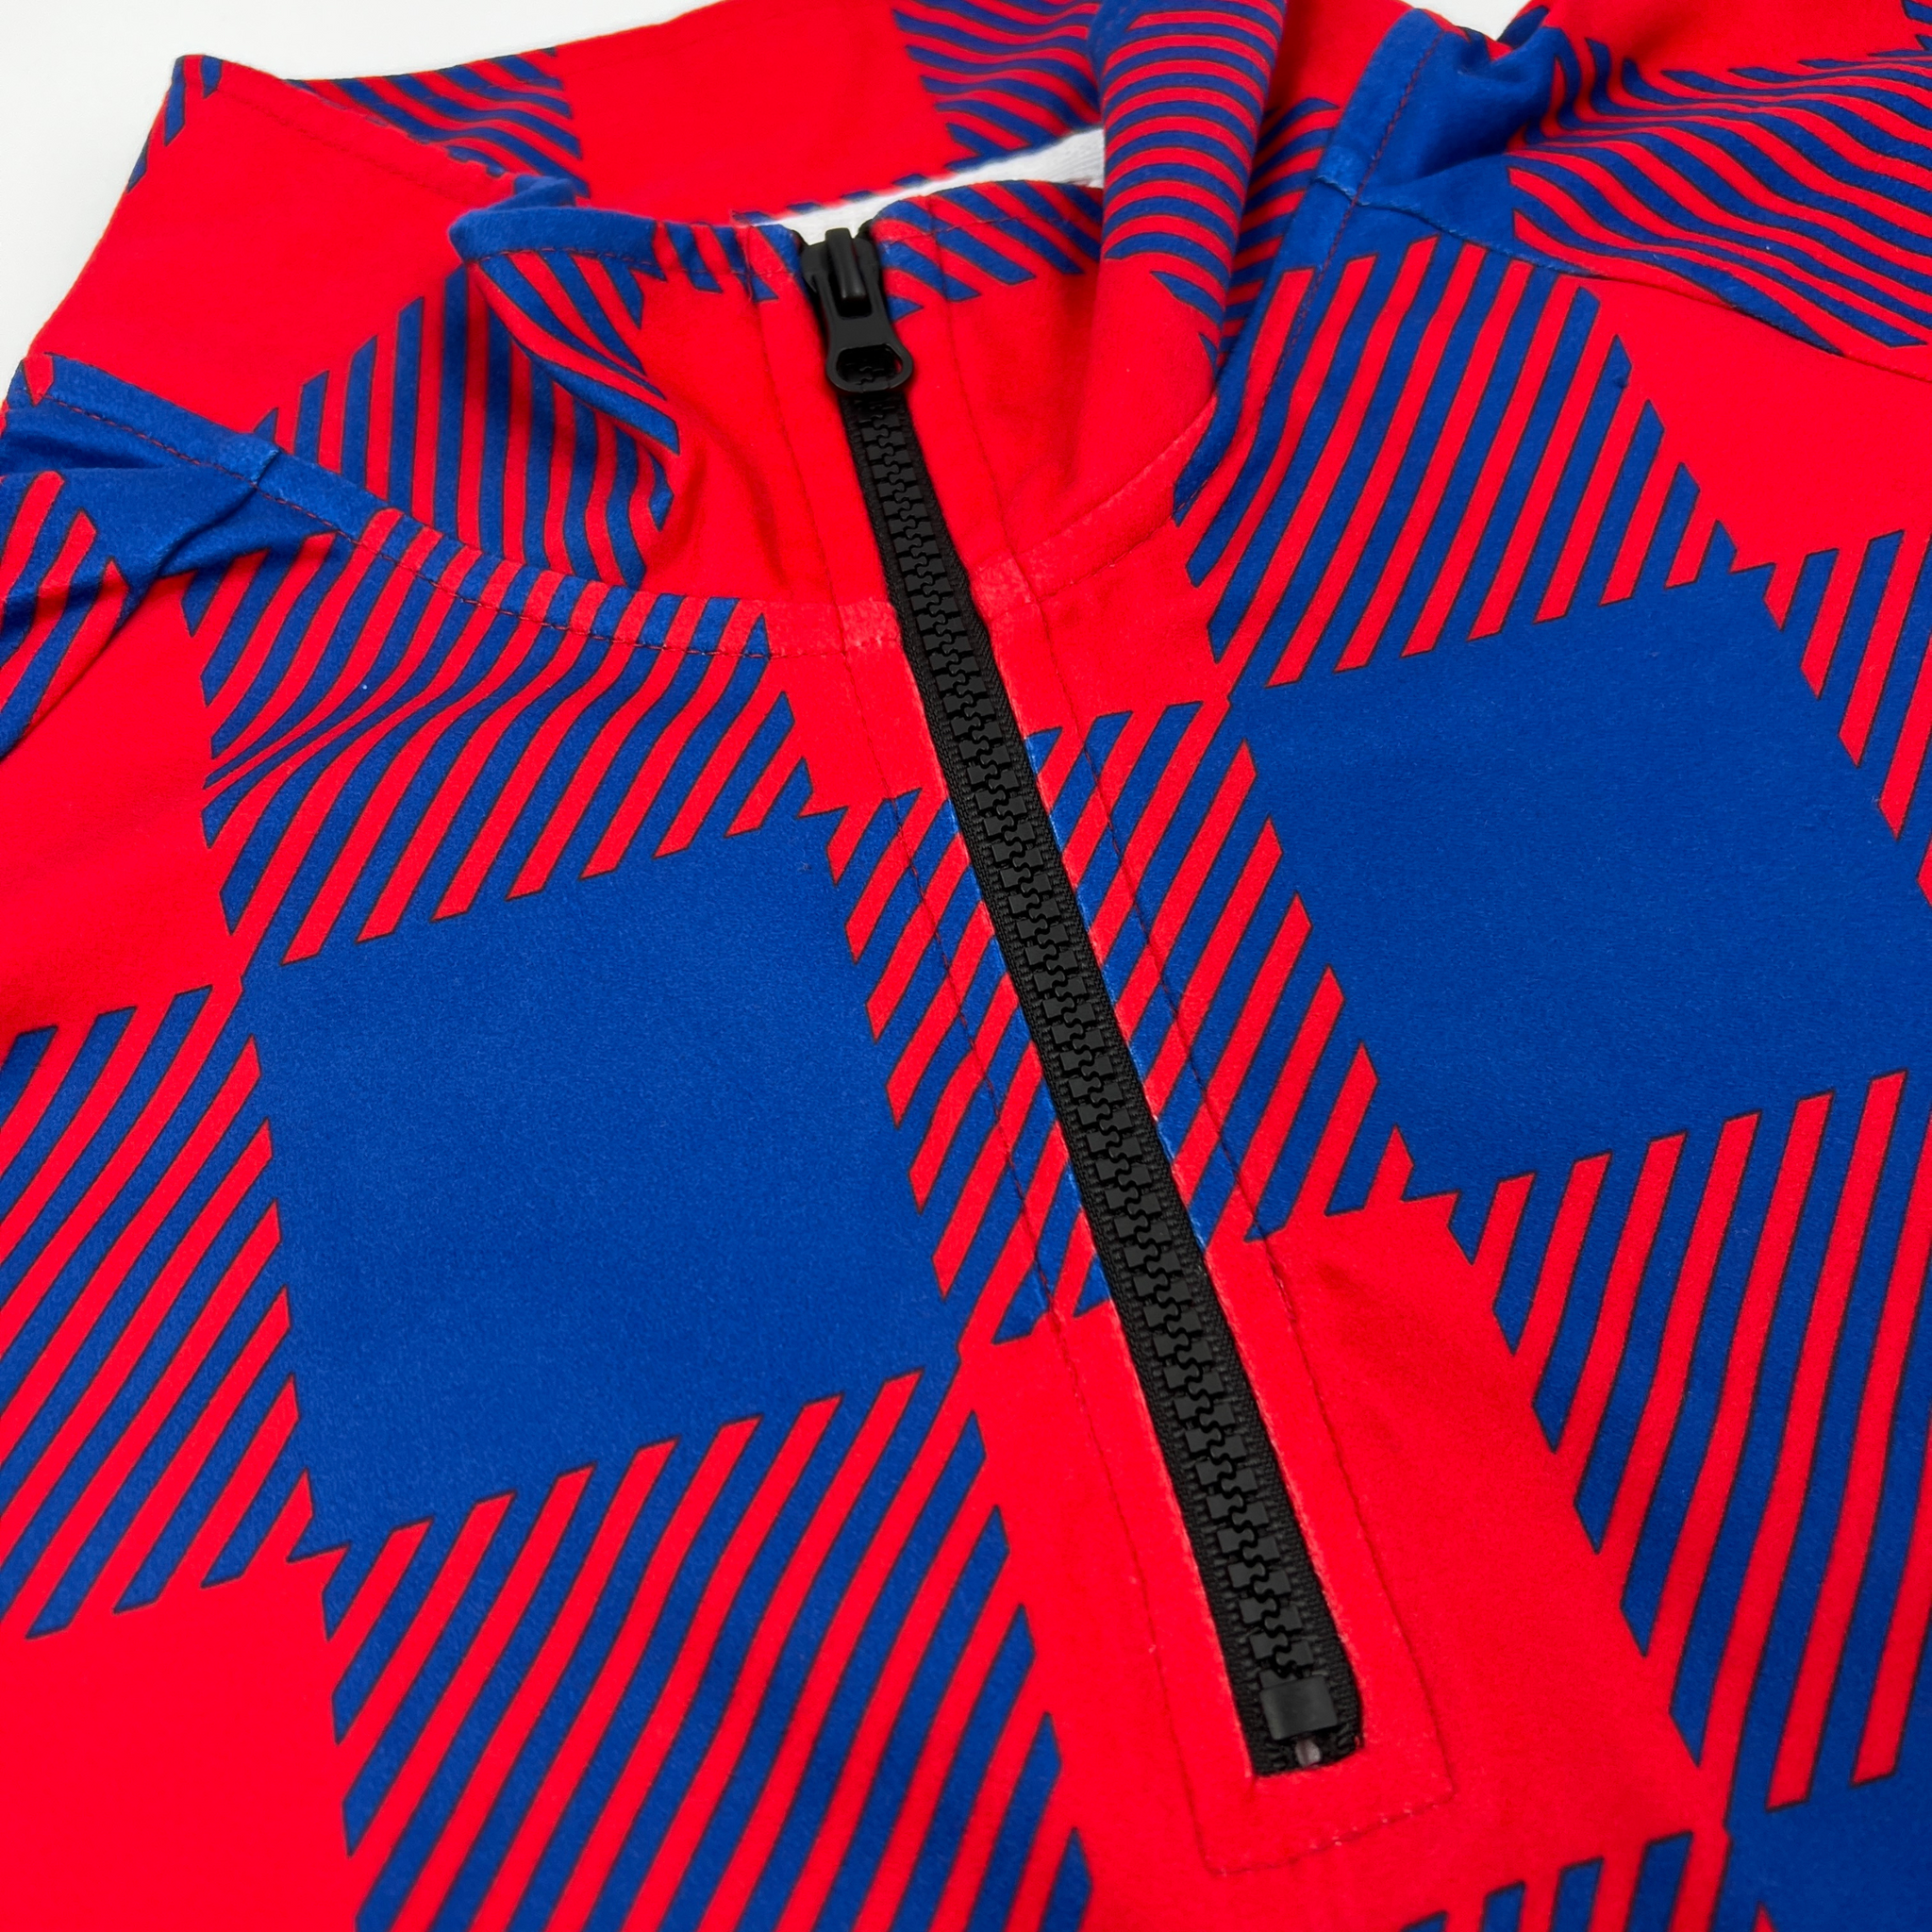 Buffalo Bills Printed Red and Blue Checkered Quarter Zip